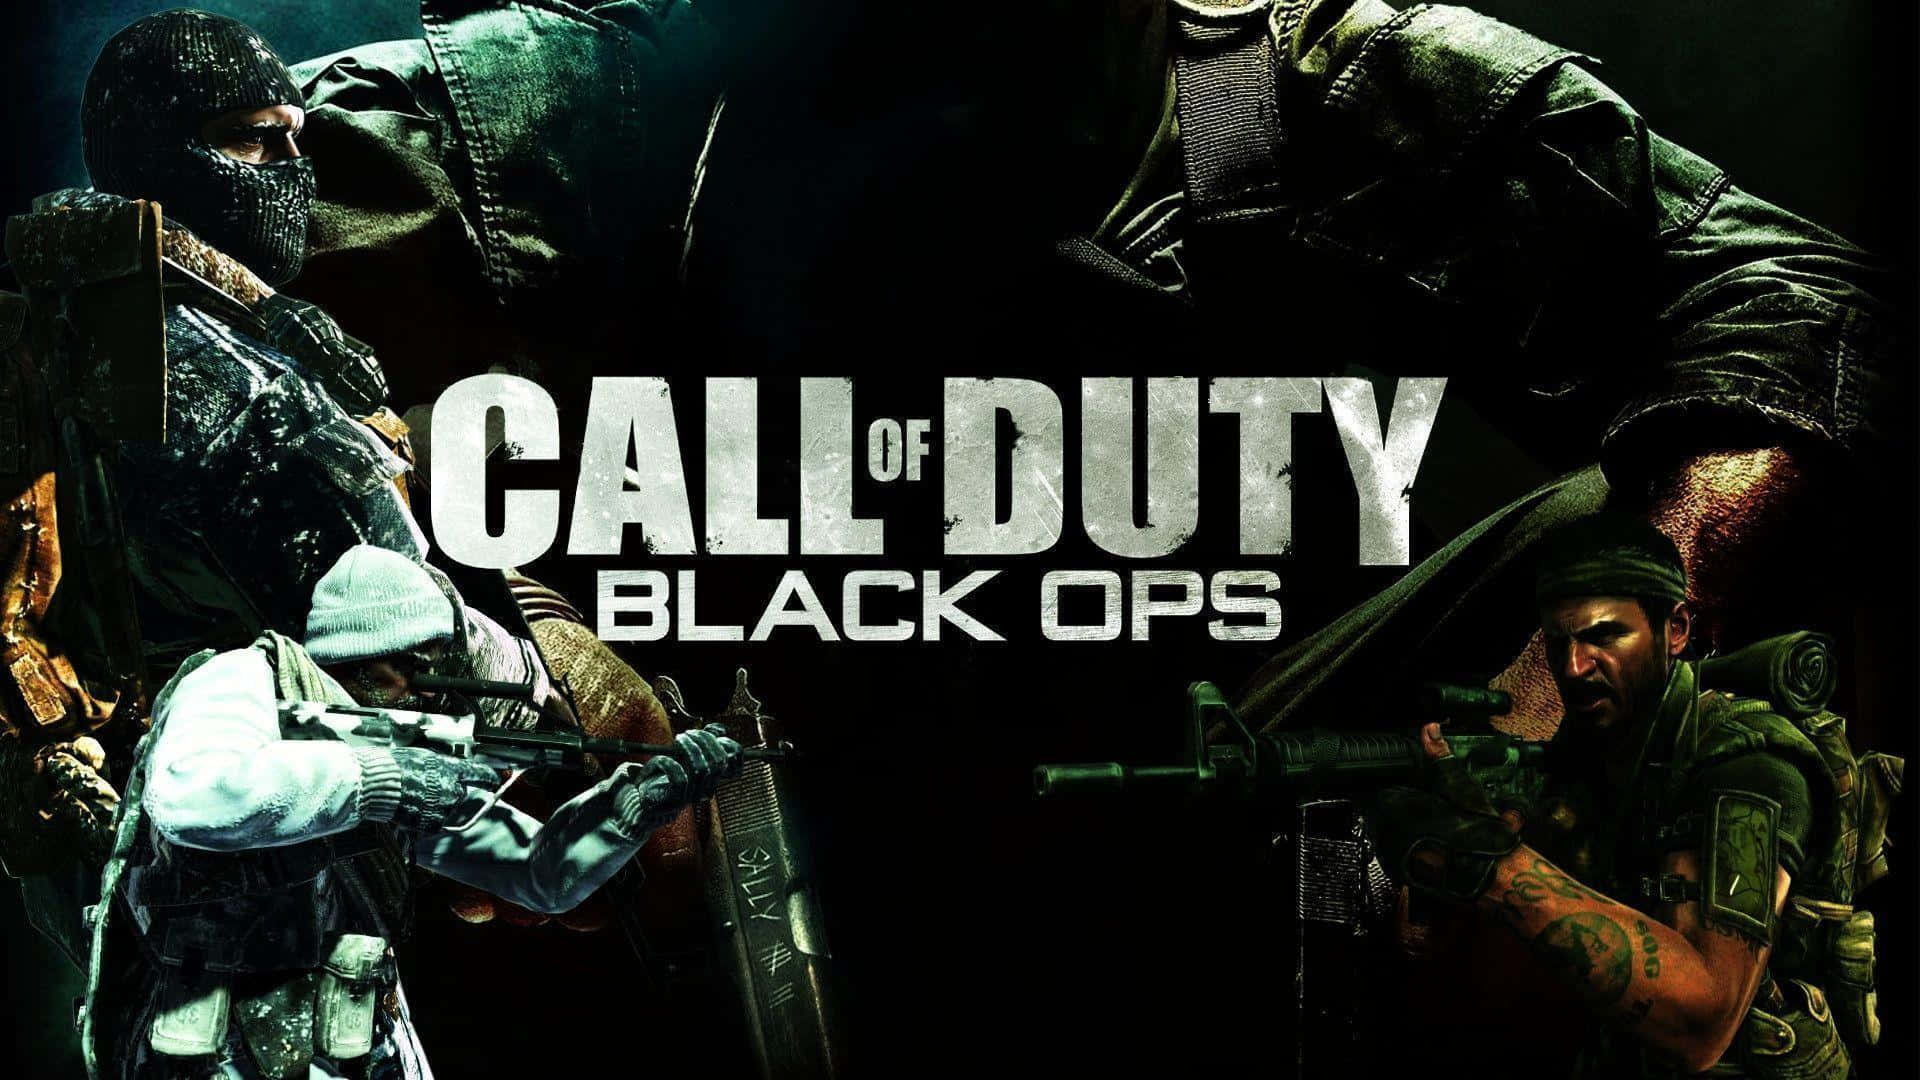 Take on the world in Call of Duty: Black Ops Wallpaper